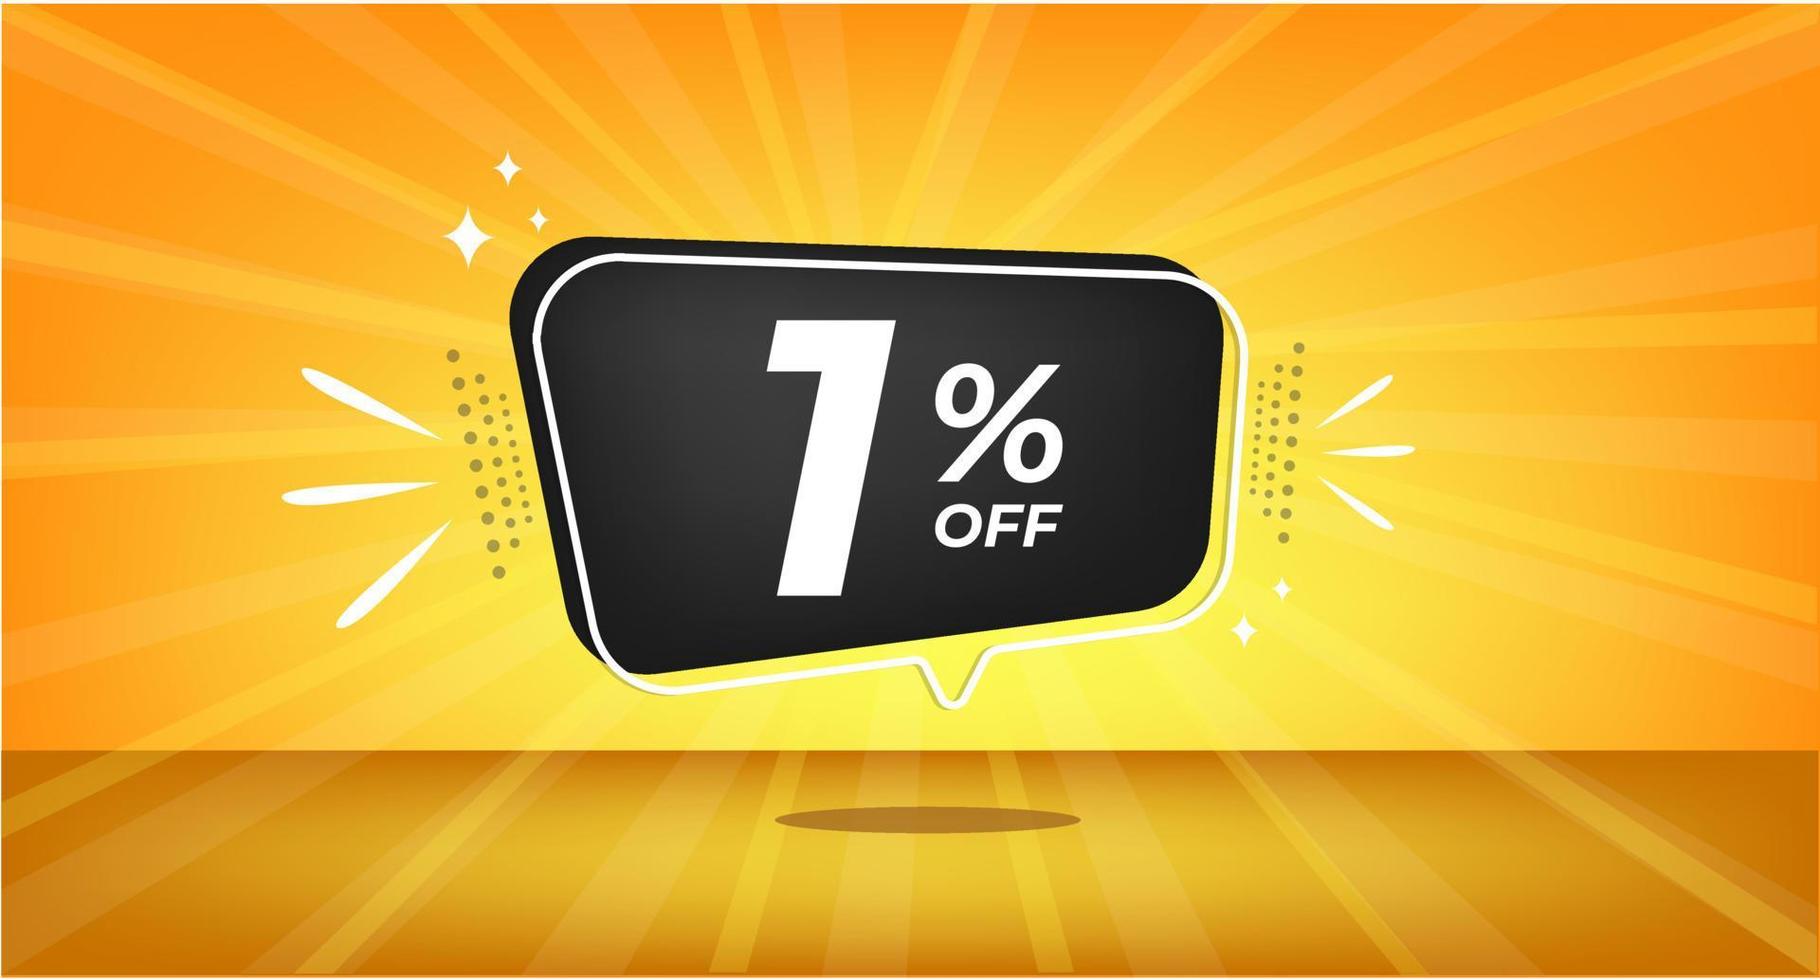 1 percent off. Yellow banner with one percent discount on a black balloon for mega big sales. vector